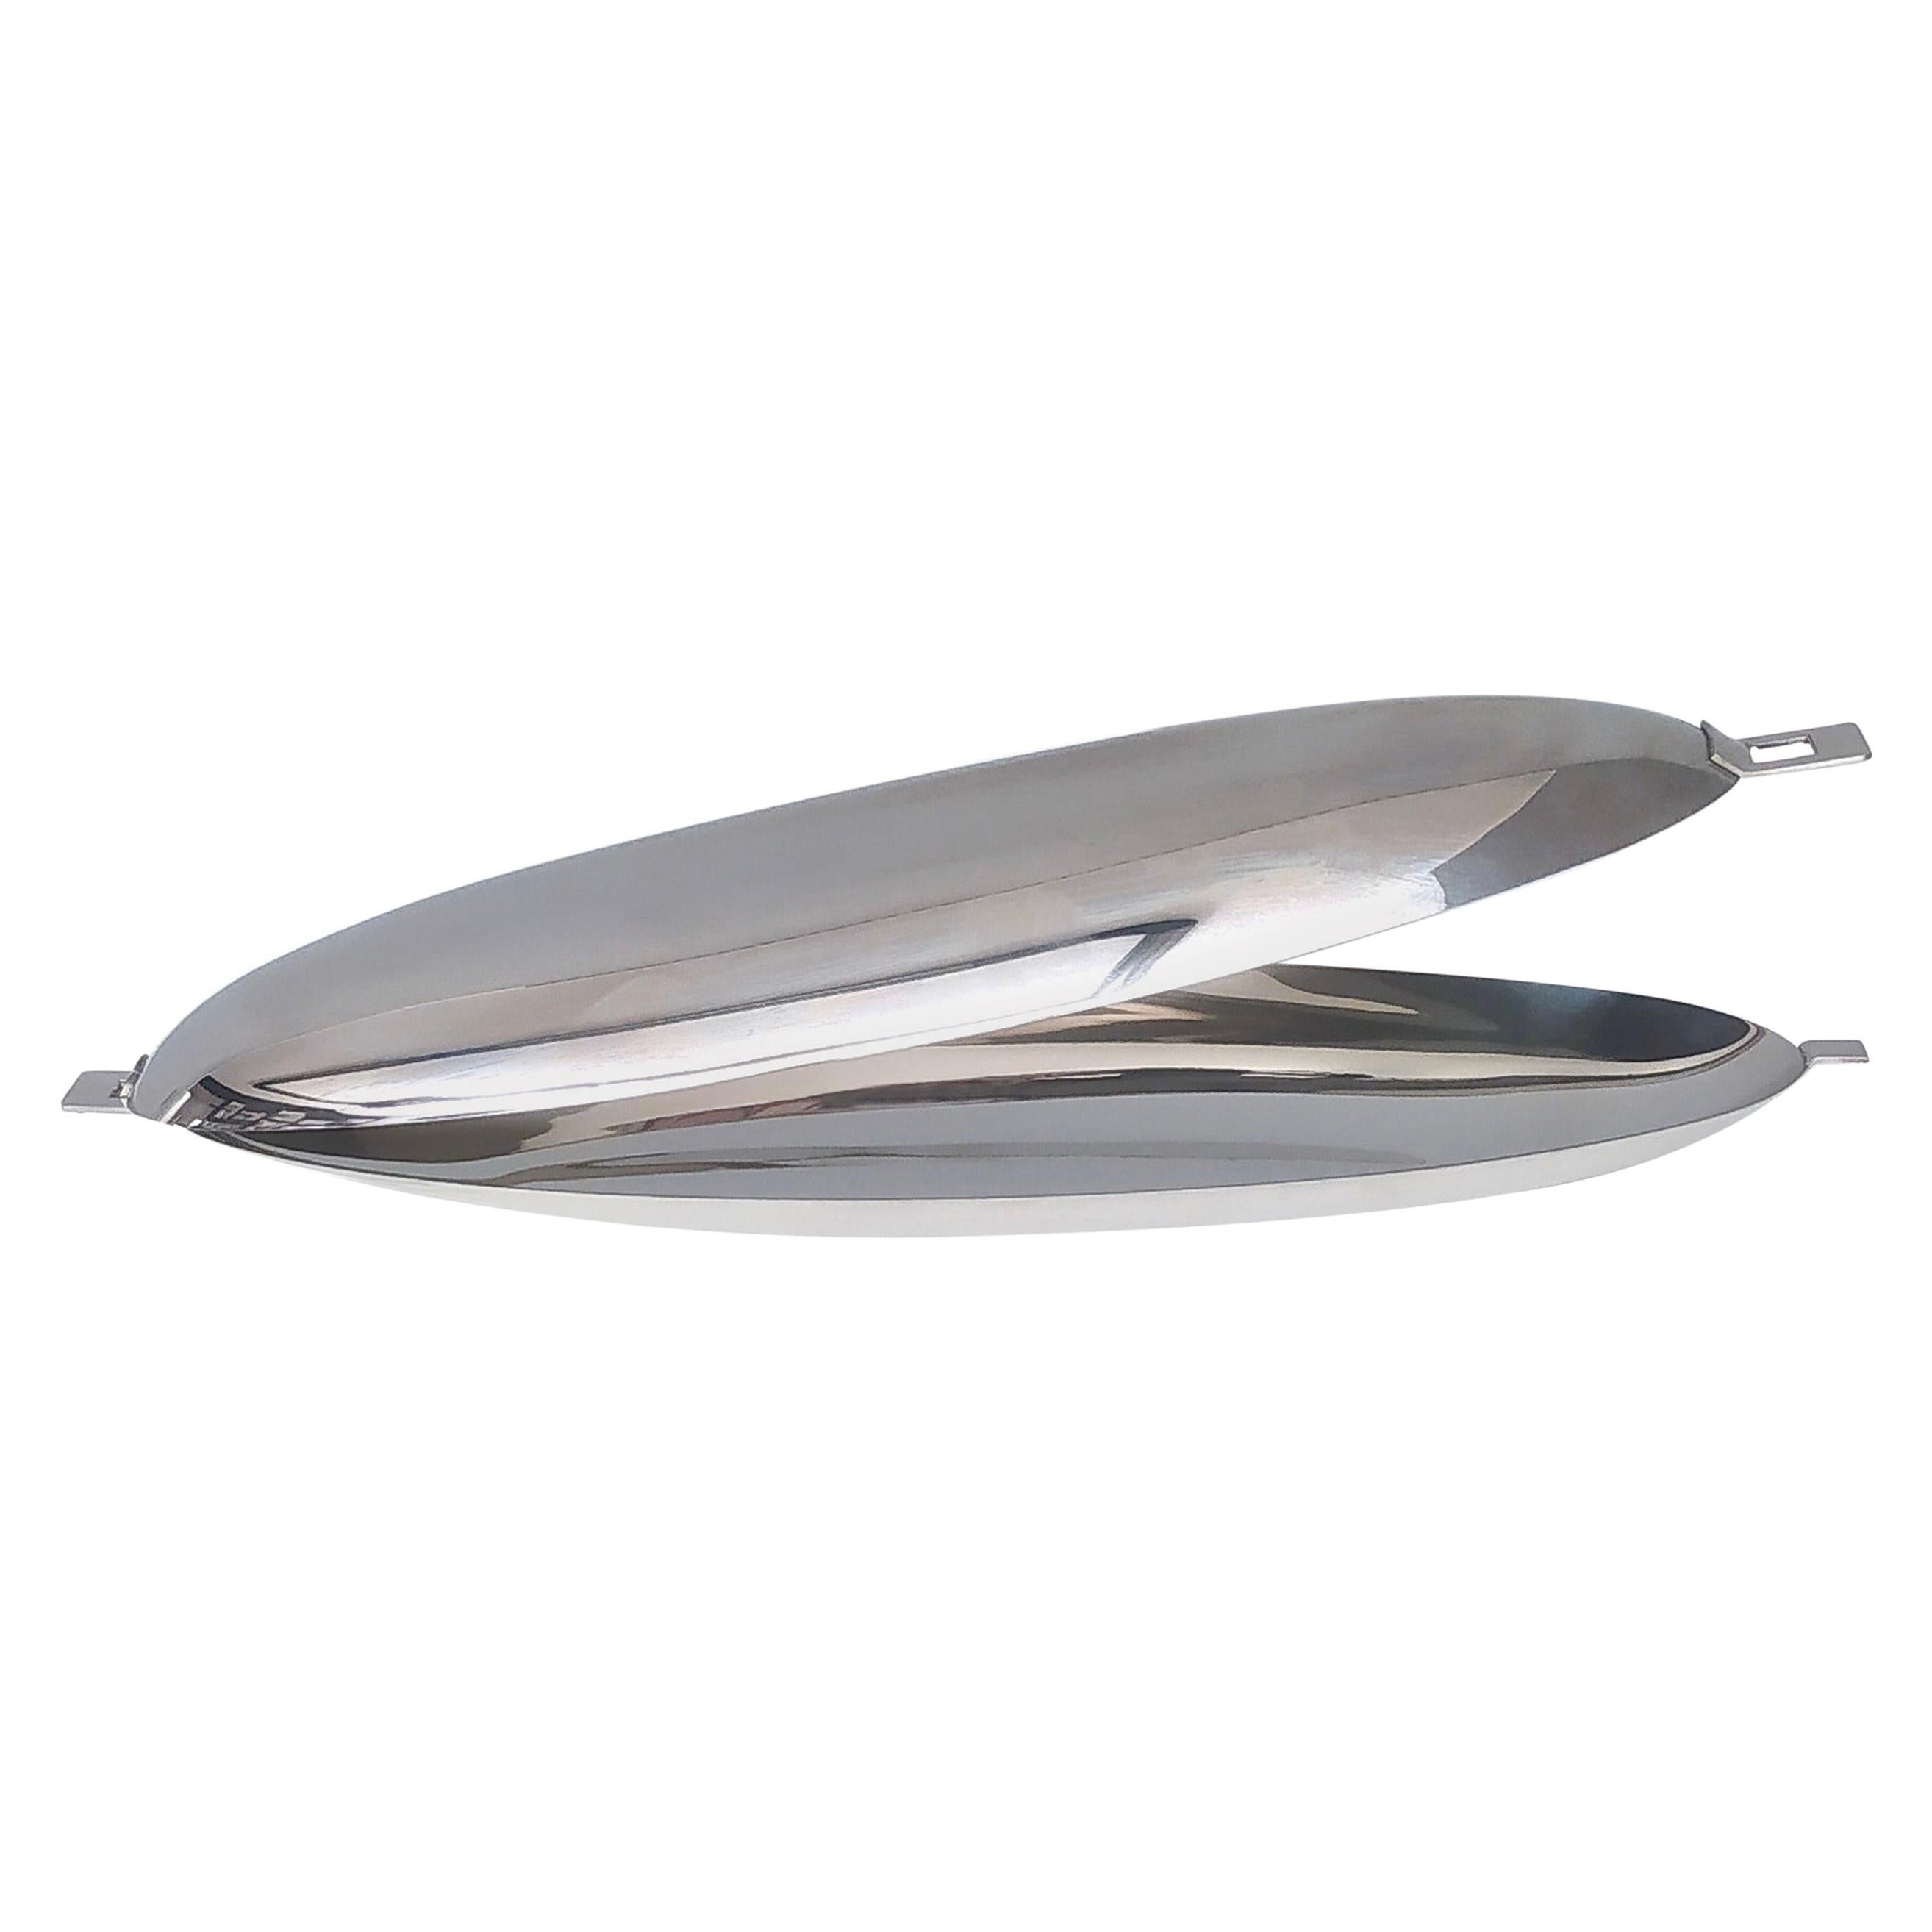 Roberto Sambonet Stainless Steel Fish Poacher with a 1960s Design, Italy, 1980s For Sale